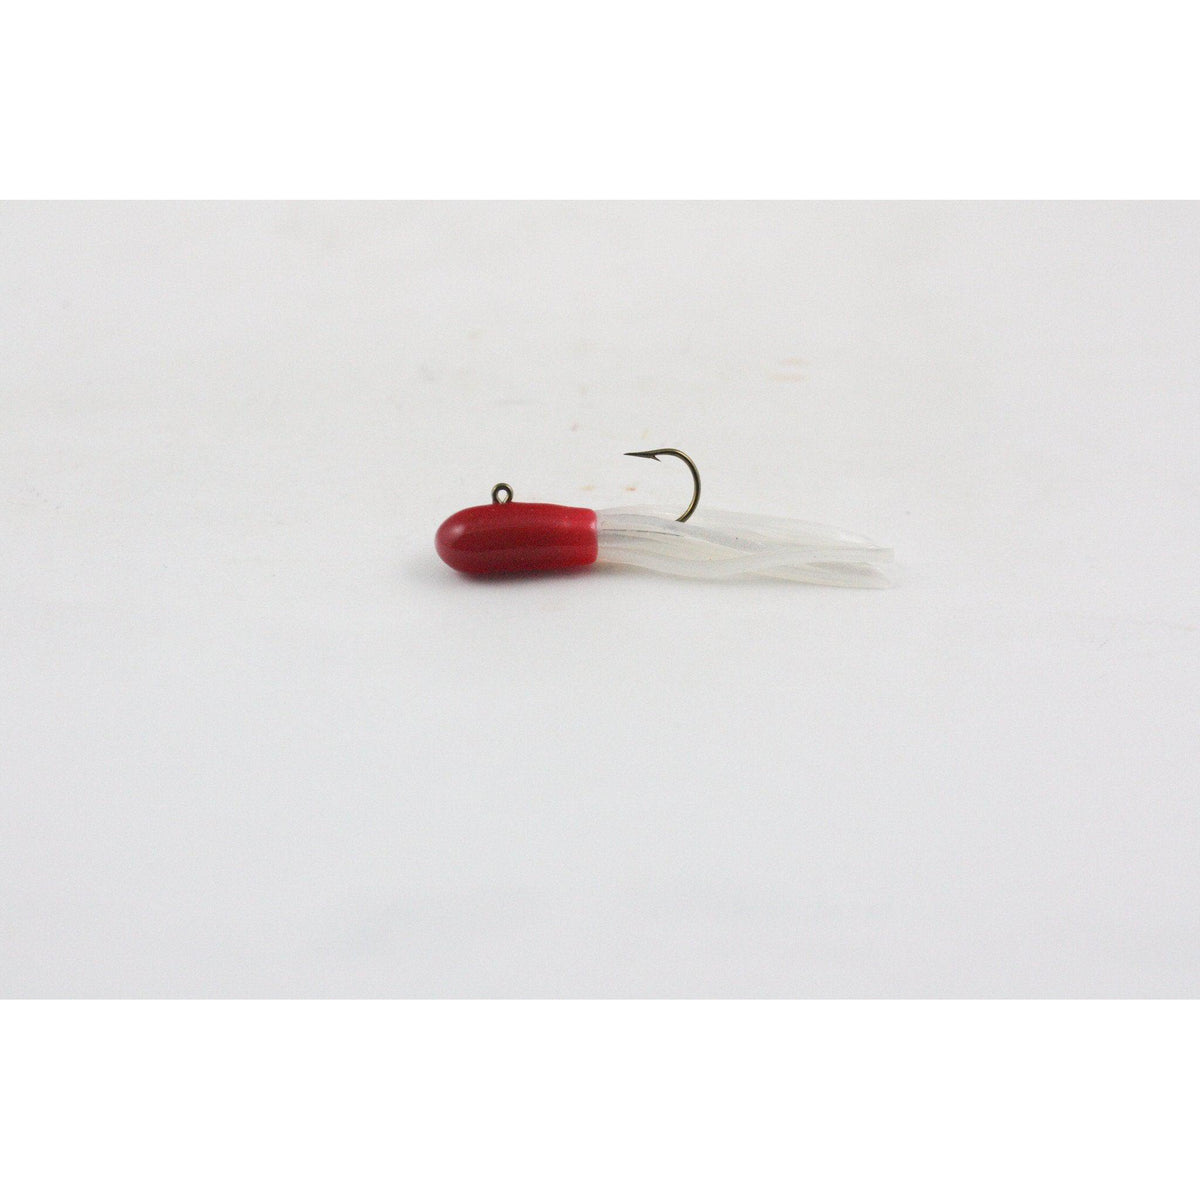 Apex Tackle SLT Mini-Tube Fishing Lures, 1.5-in, Red/Chartreuse